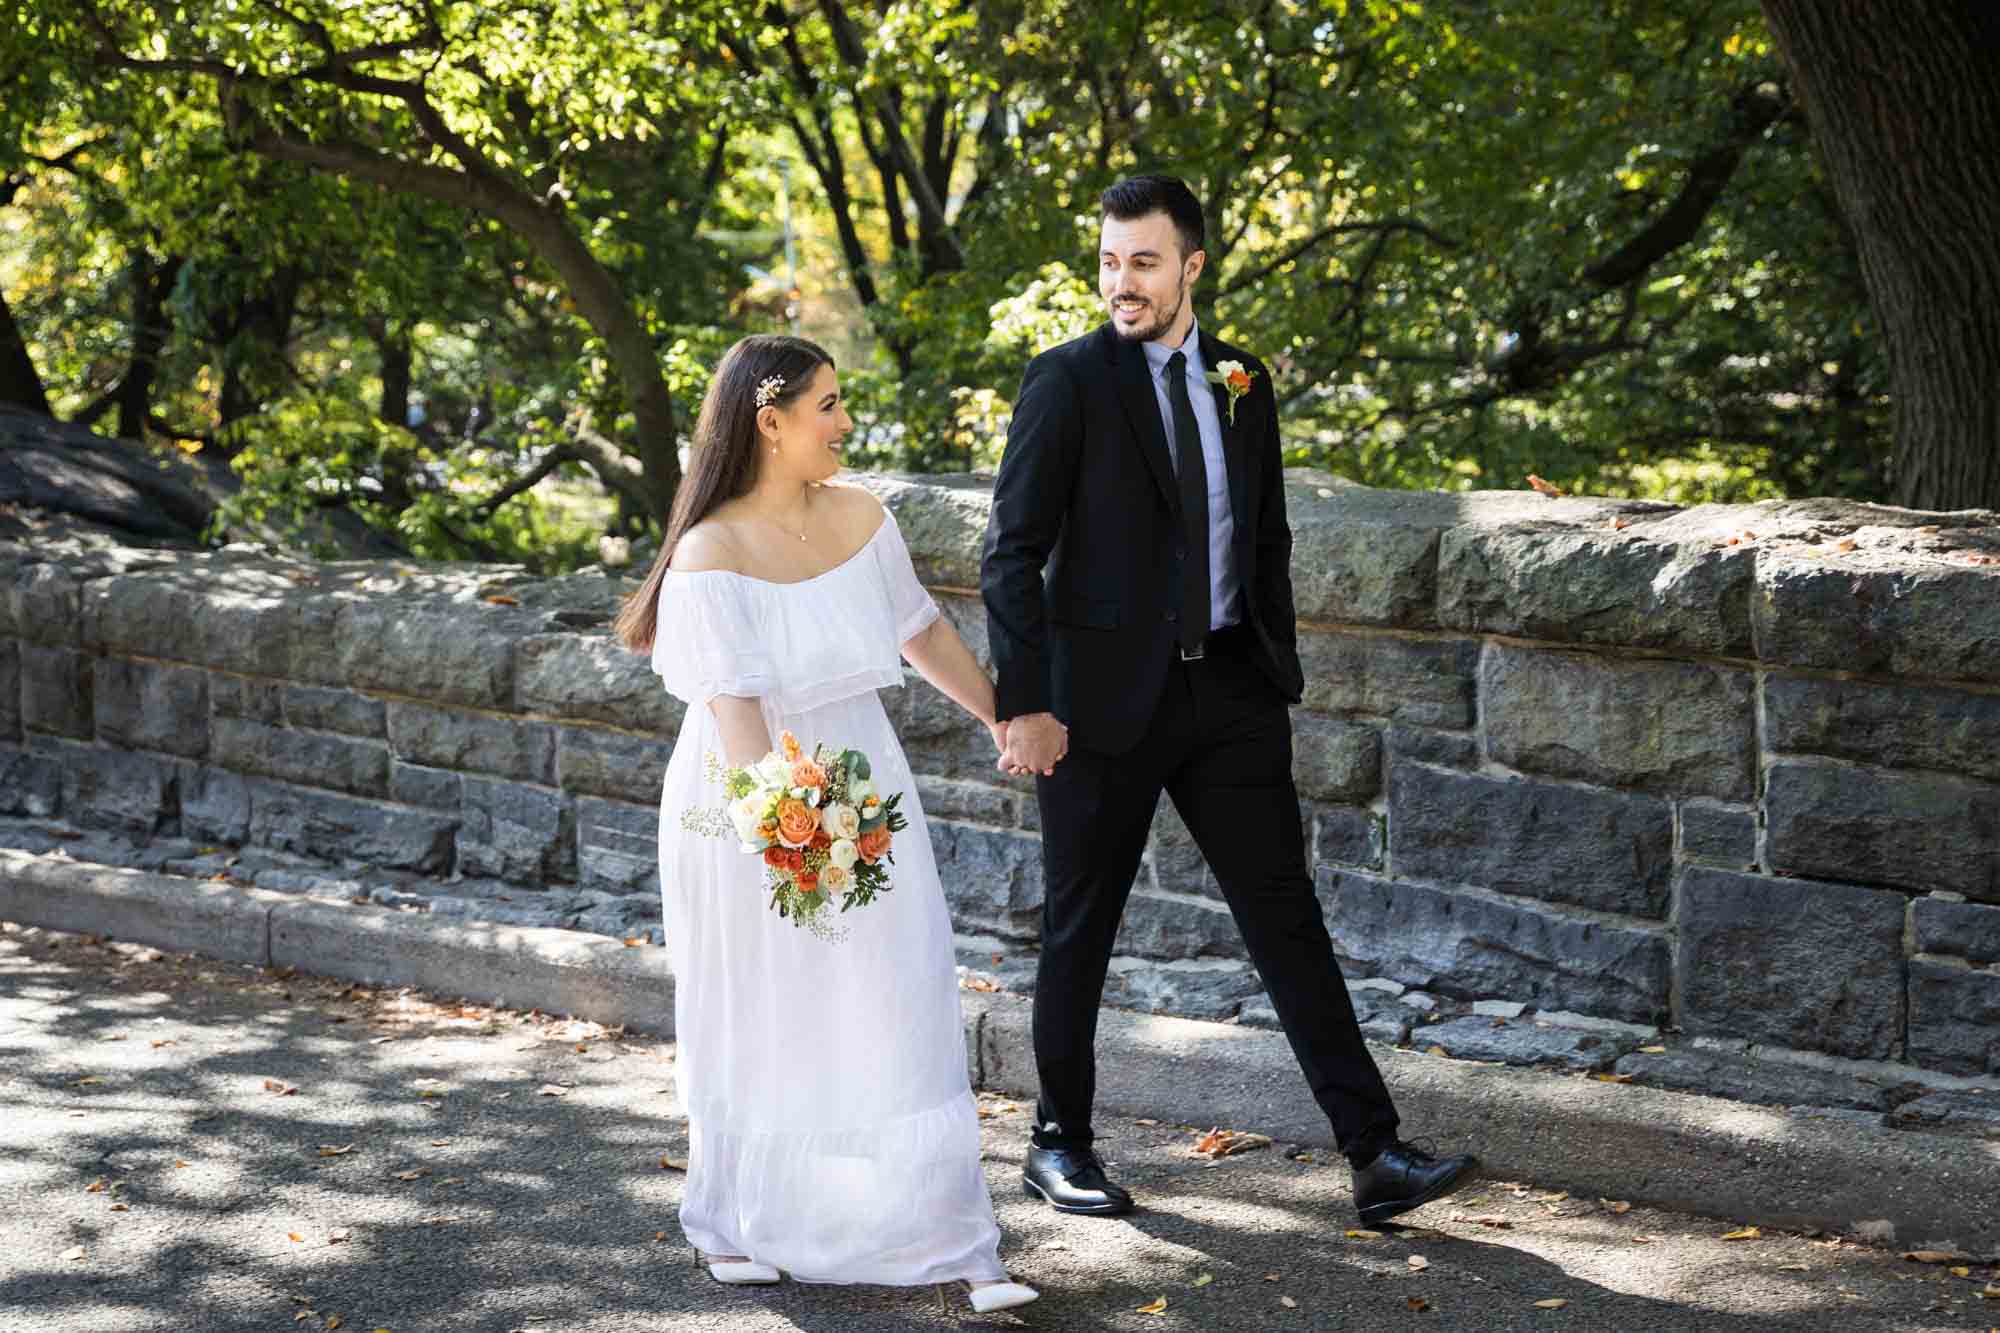 Bride and groom walking hand-in-hand in park Article on how to elope in Central Park by NYC wedding photojournalist, Kelly Williams. Includes photos from a real wedding near Bow Bridge.